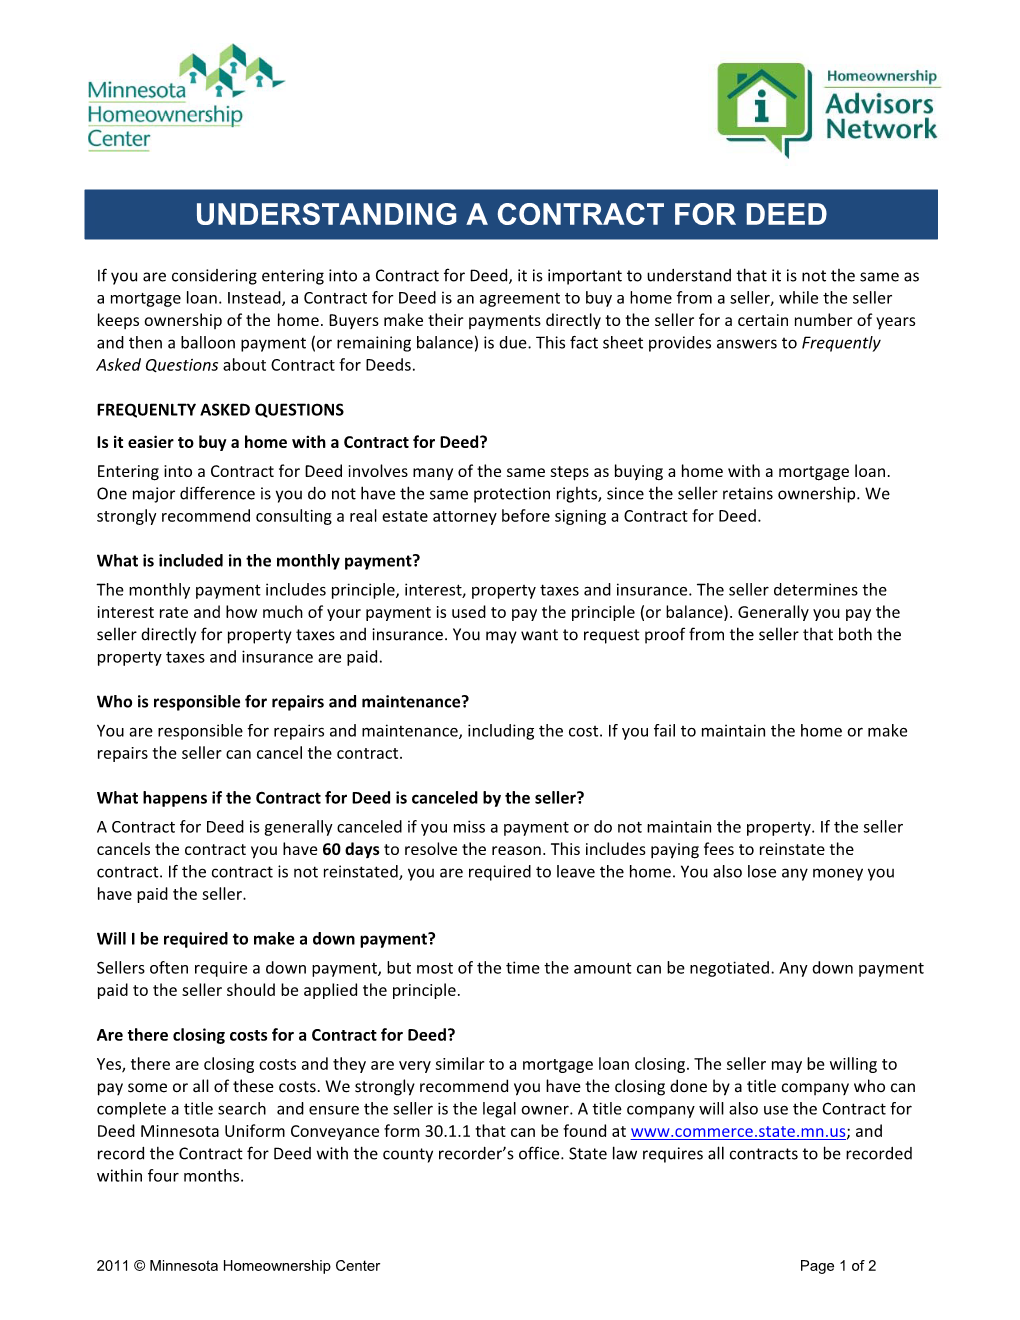 Understanding a Contract for Deed